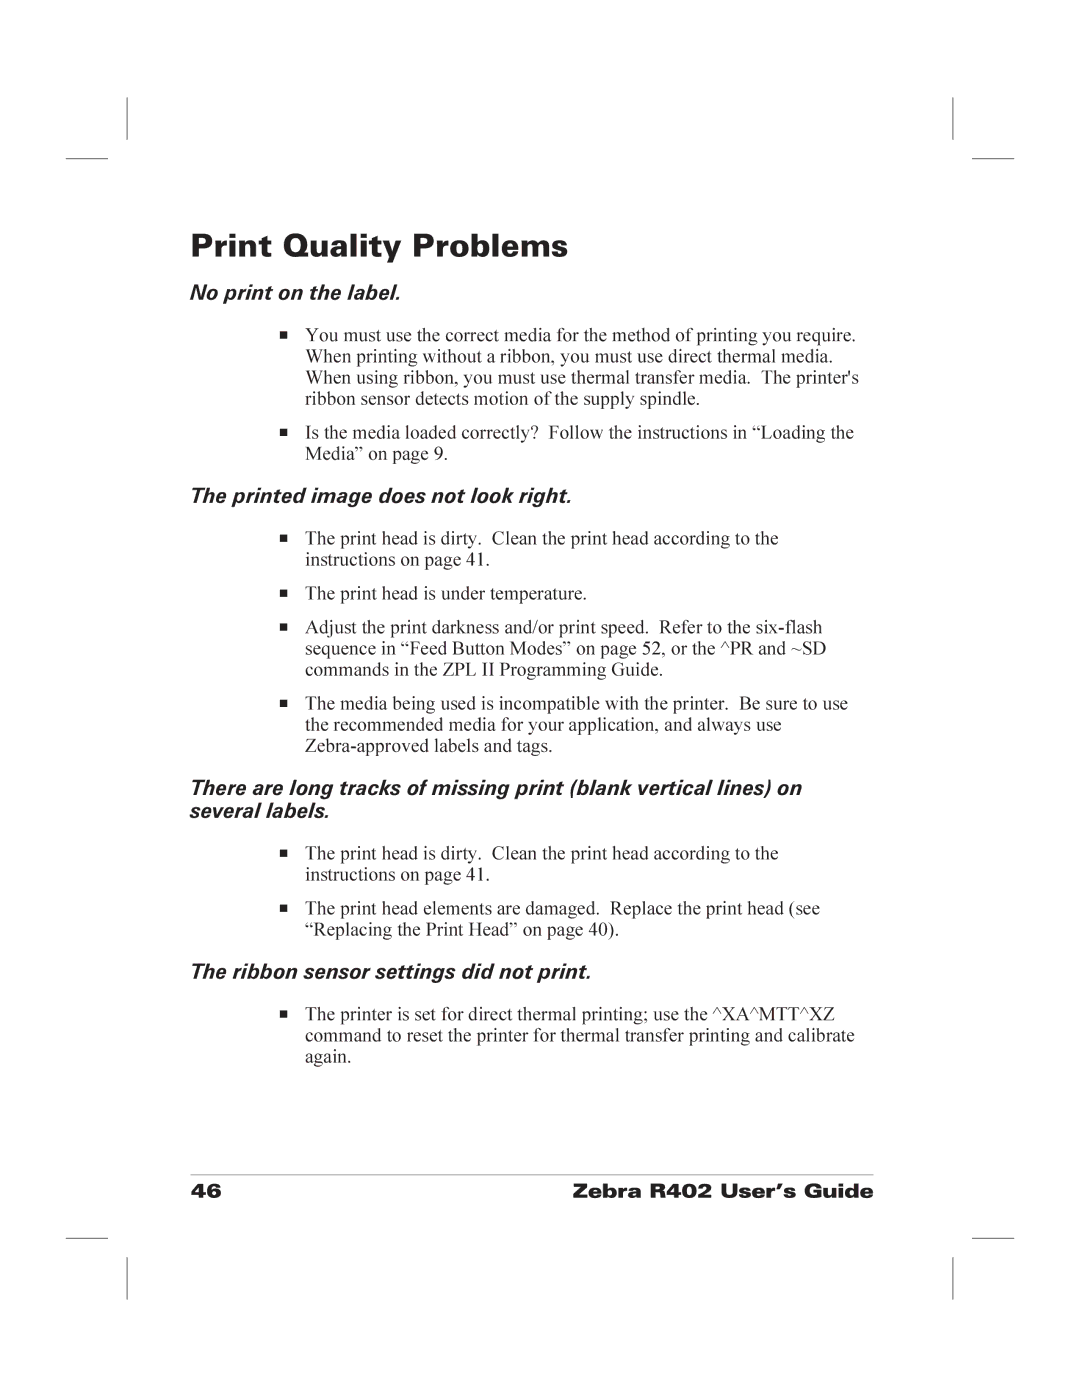 Zebra Technologies R402 manual Print Quality Problems, No print on the label, Printed image does not look right 